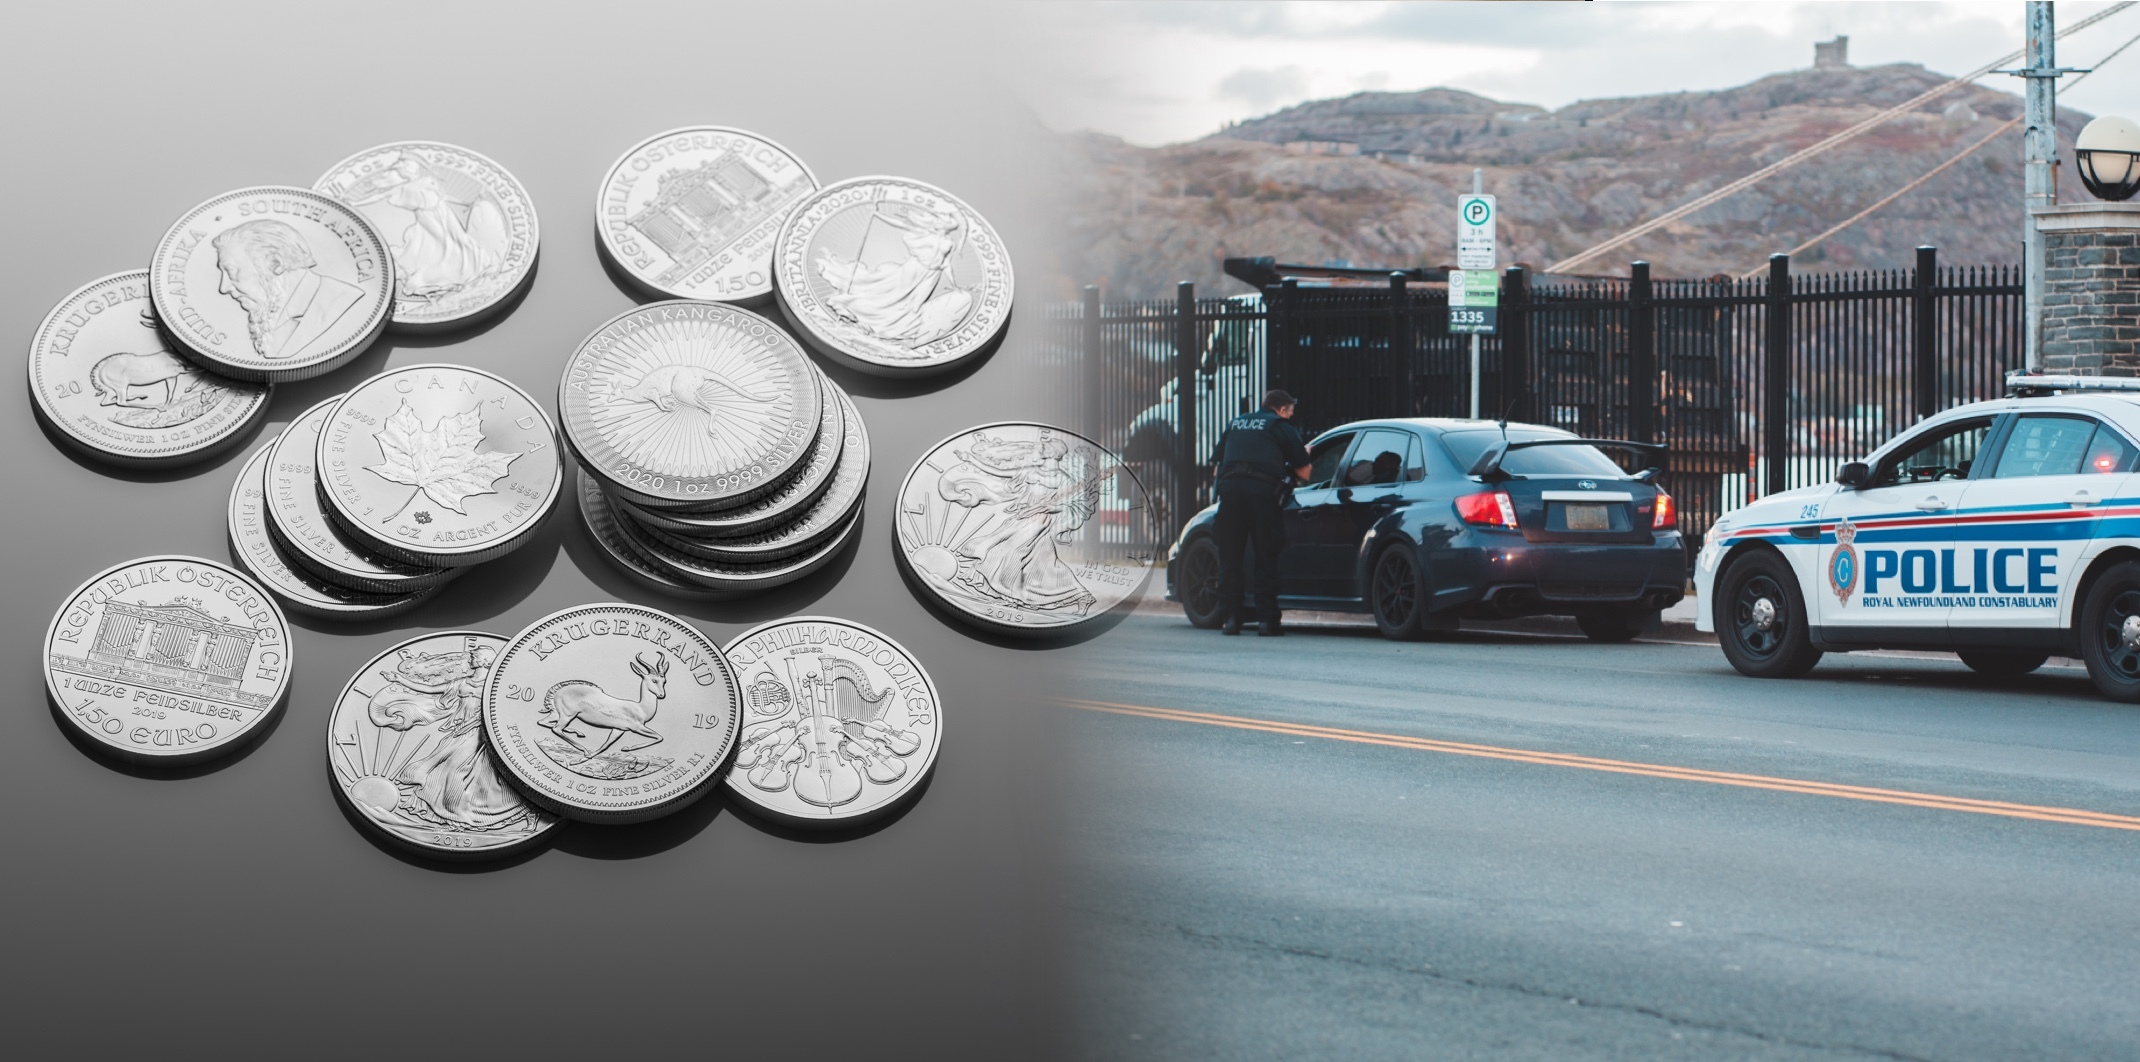 A pile of coins and a pulled over car